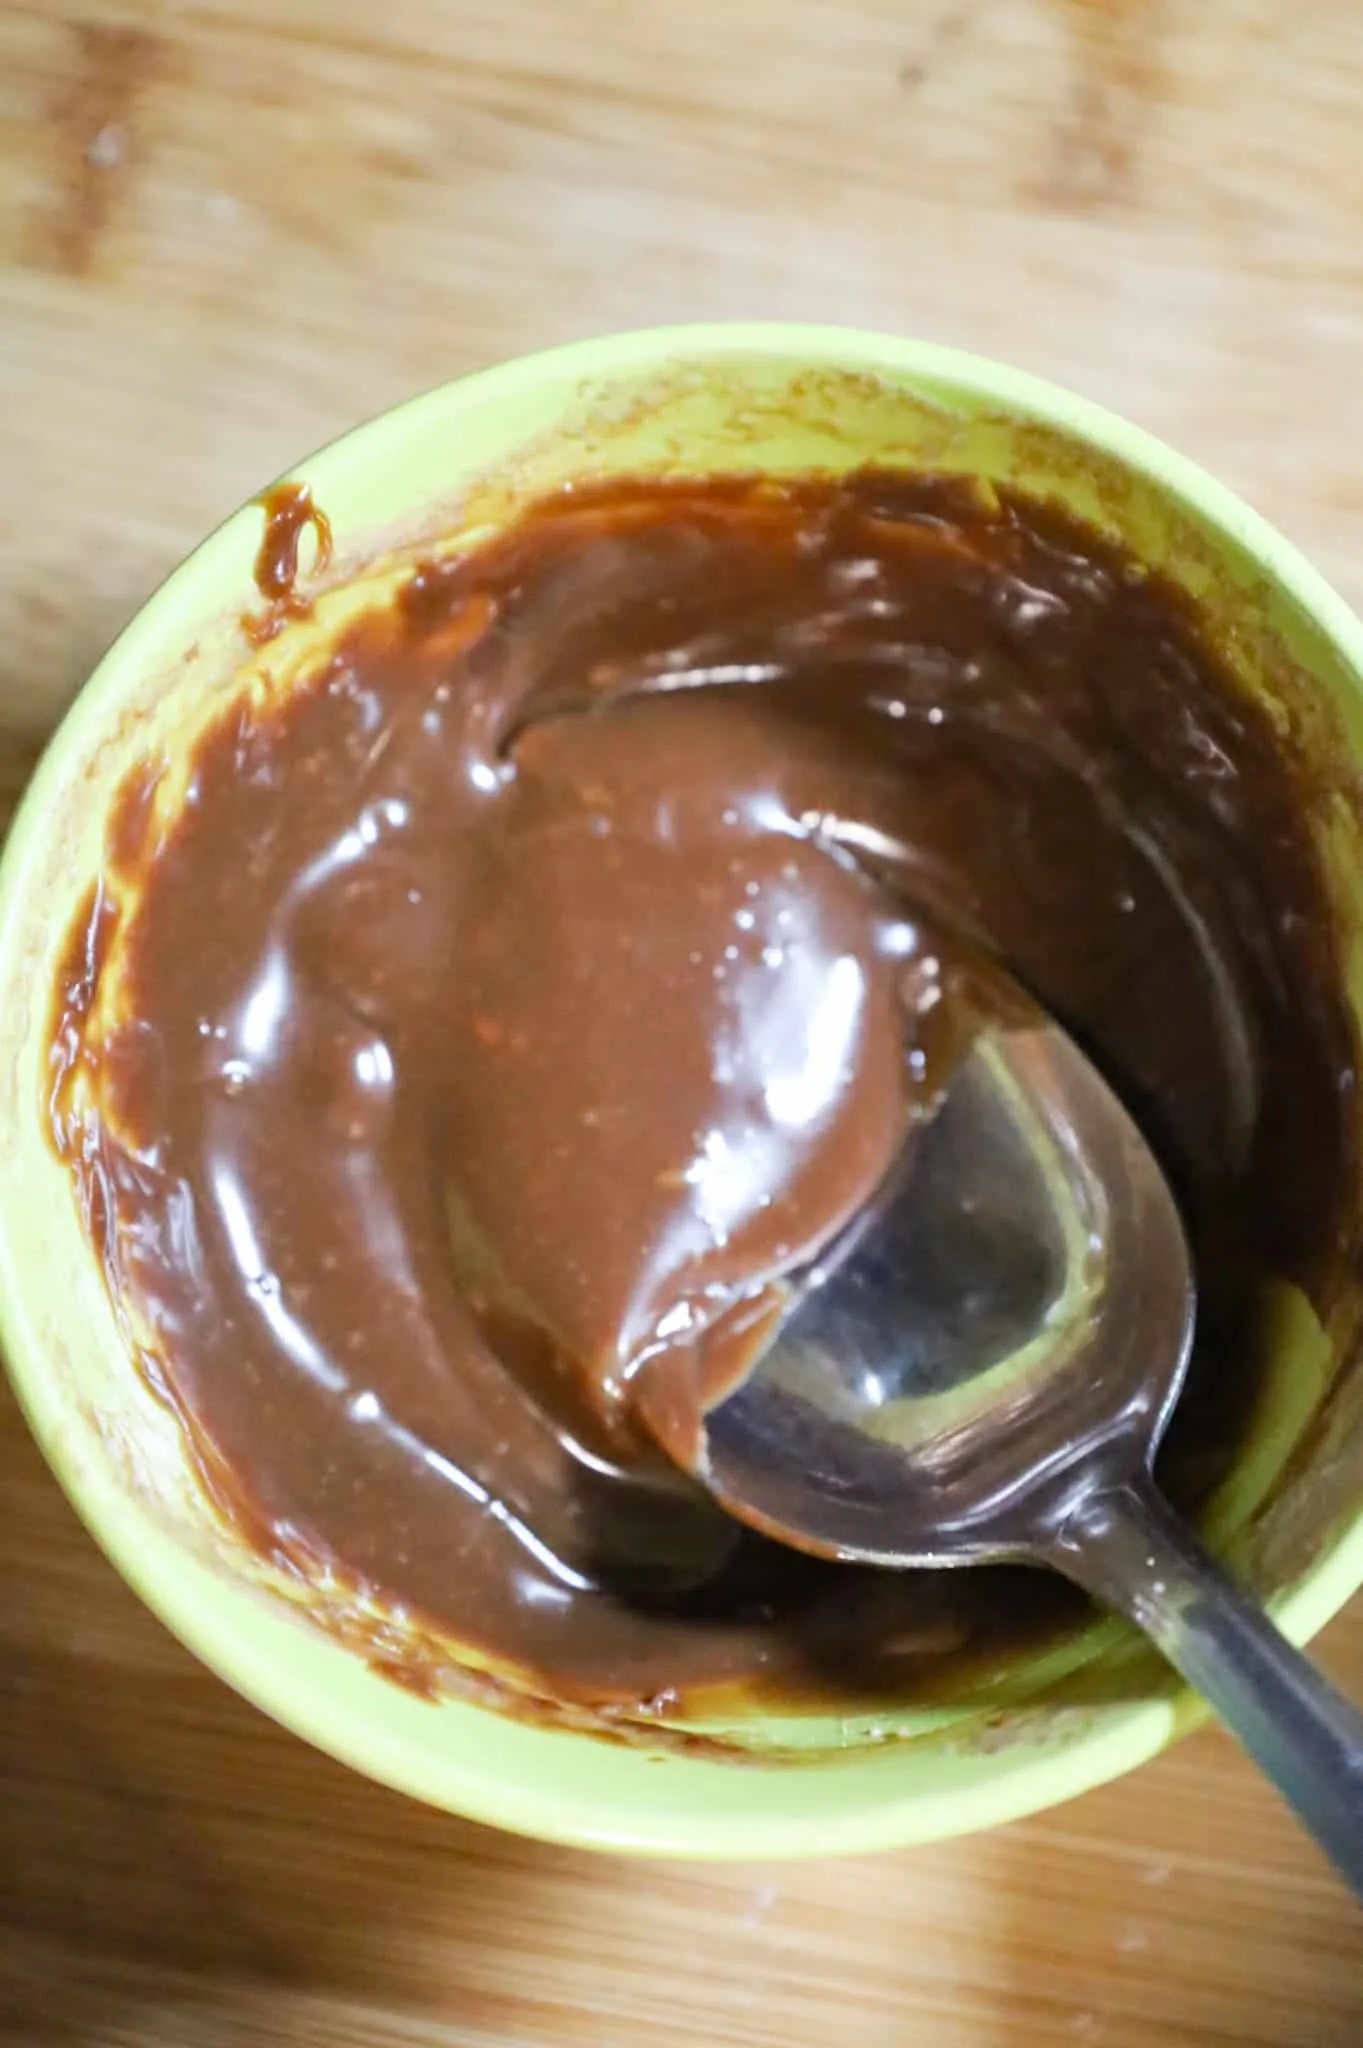 melted chocolate in a small bowl